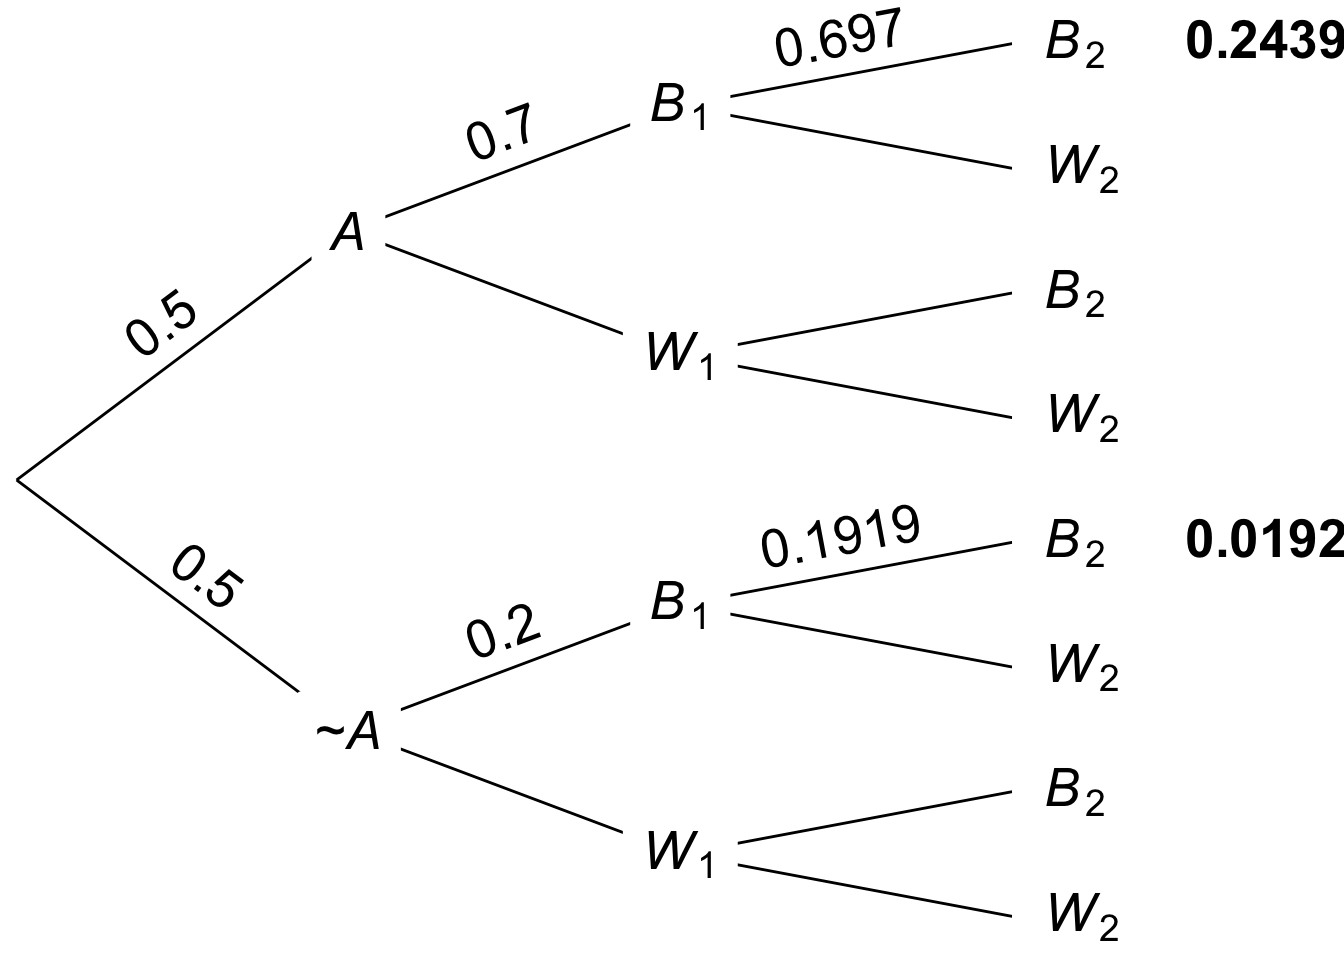 Tree diagram for two draws without replacement, values rounded